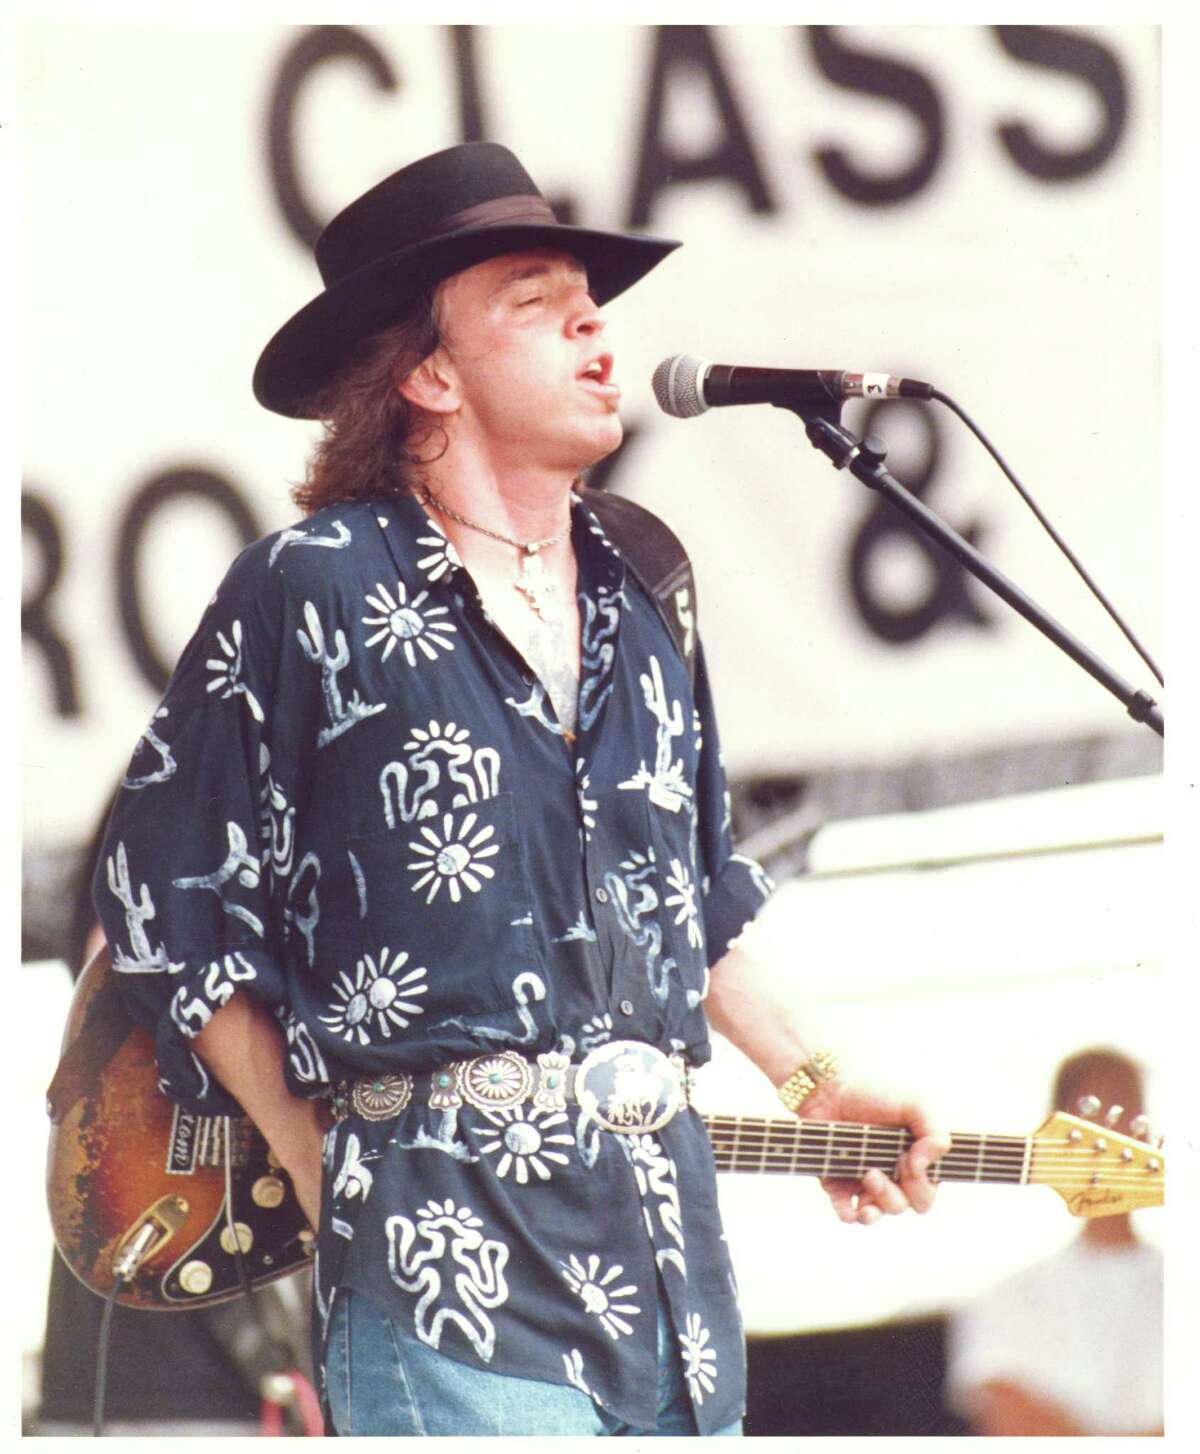 Stevie Ray Vaughan joined brother Jimmie and the Fabulous Thunderbirds outside the Astrodome before a 1989 concert opening for The Who.